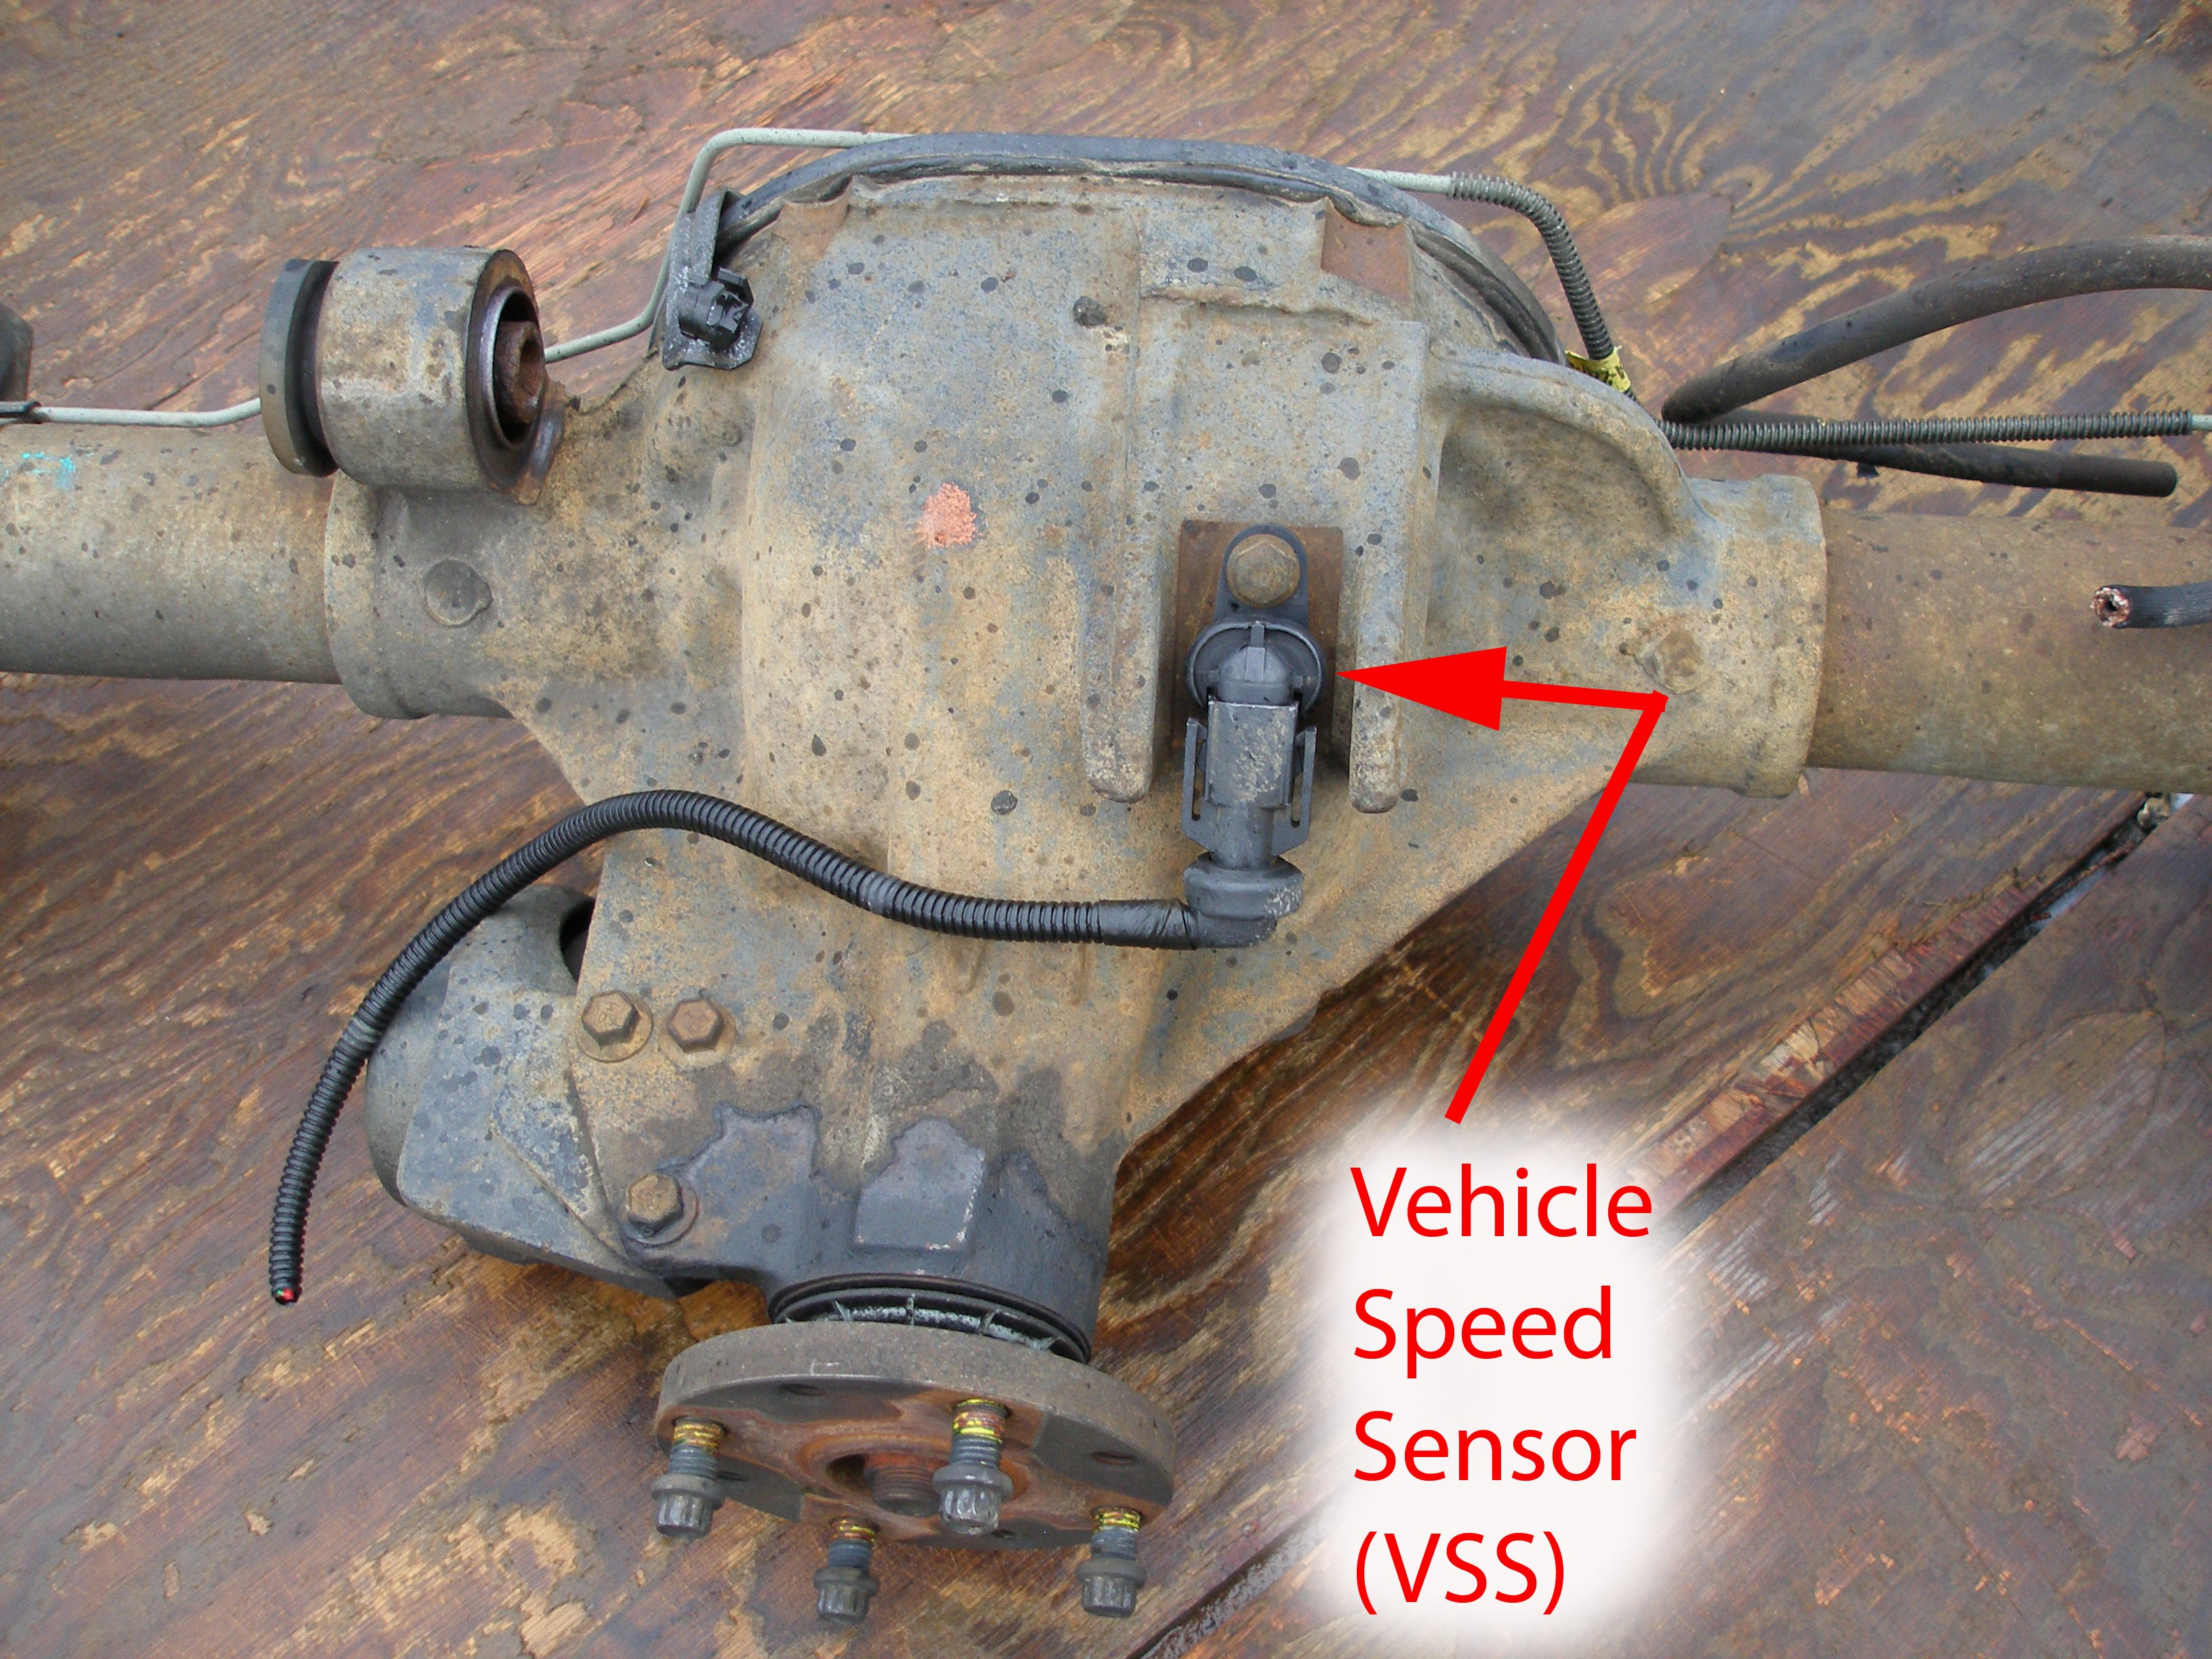 P0500 Speed Sensor A Malfunction Ford Truck Enthusiasts Forums